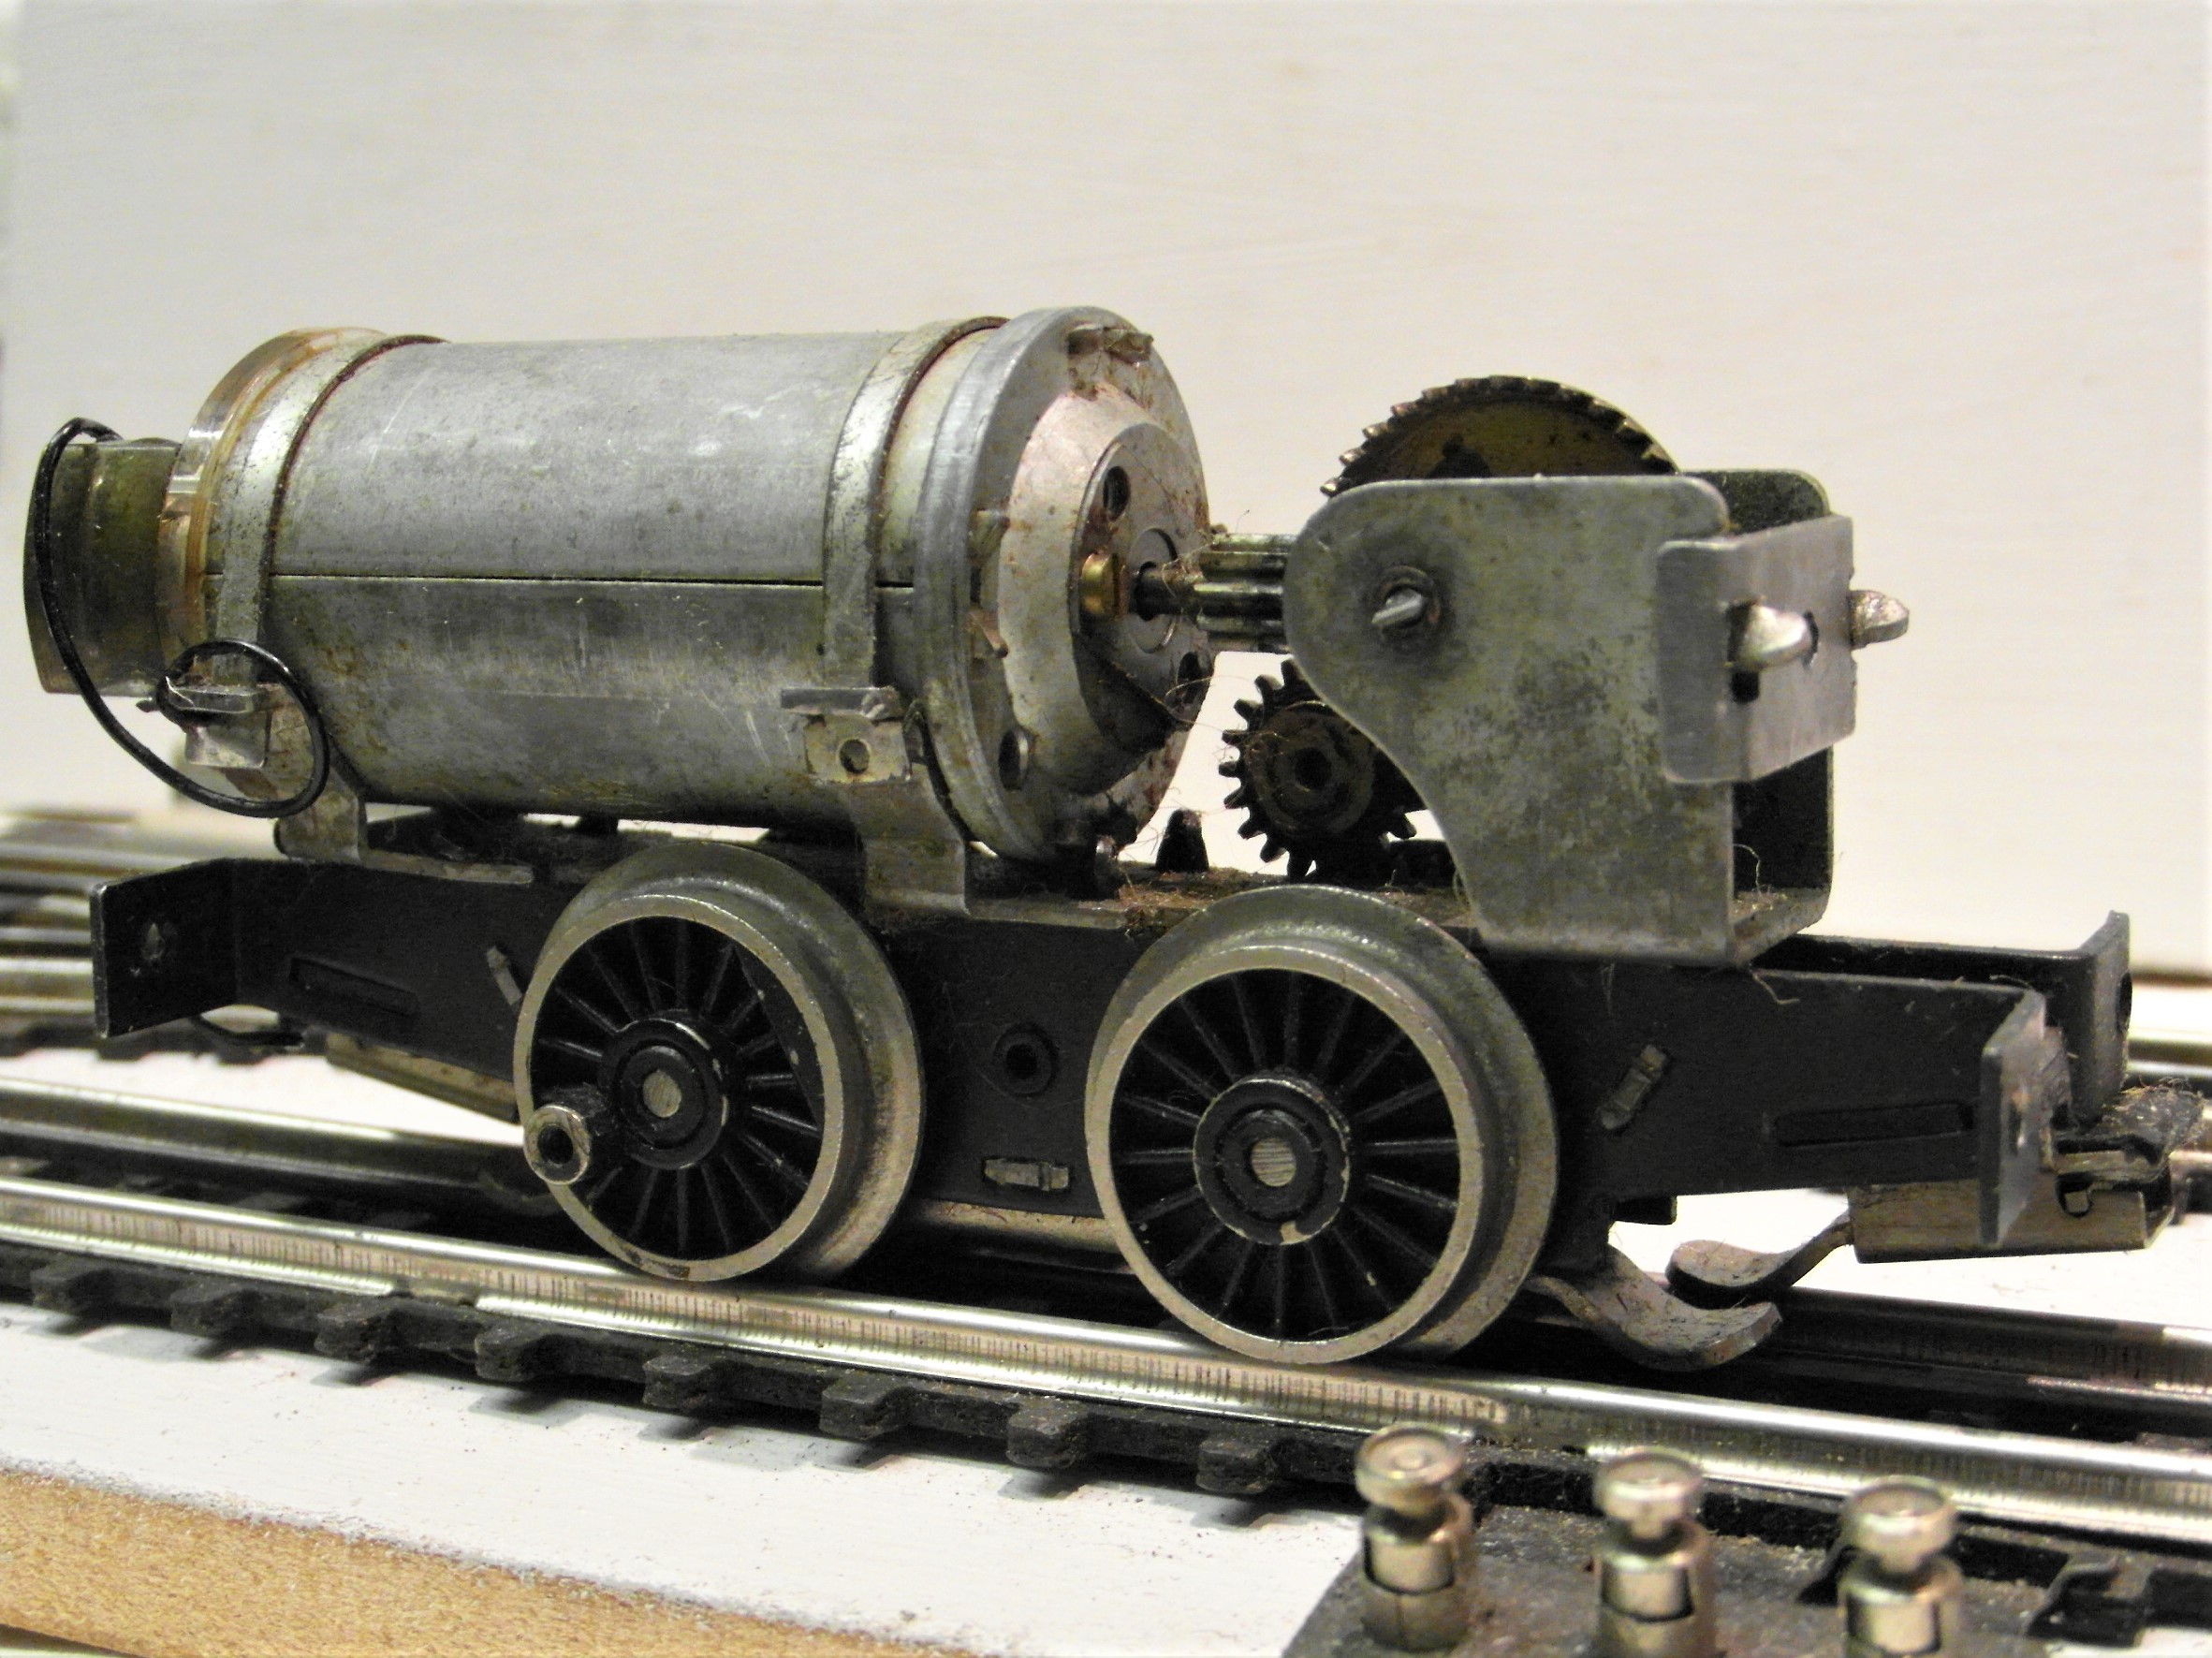 From the Cadet range the connecting rods have been removed. Gearing between wheels means they serve no technical purpose.